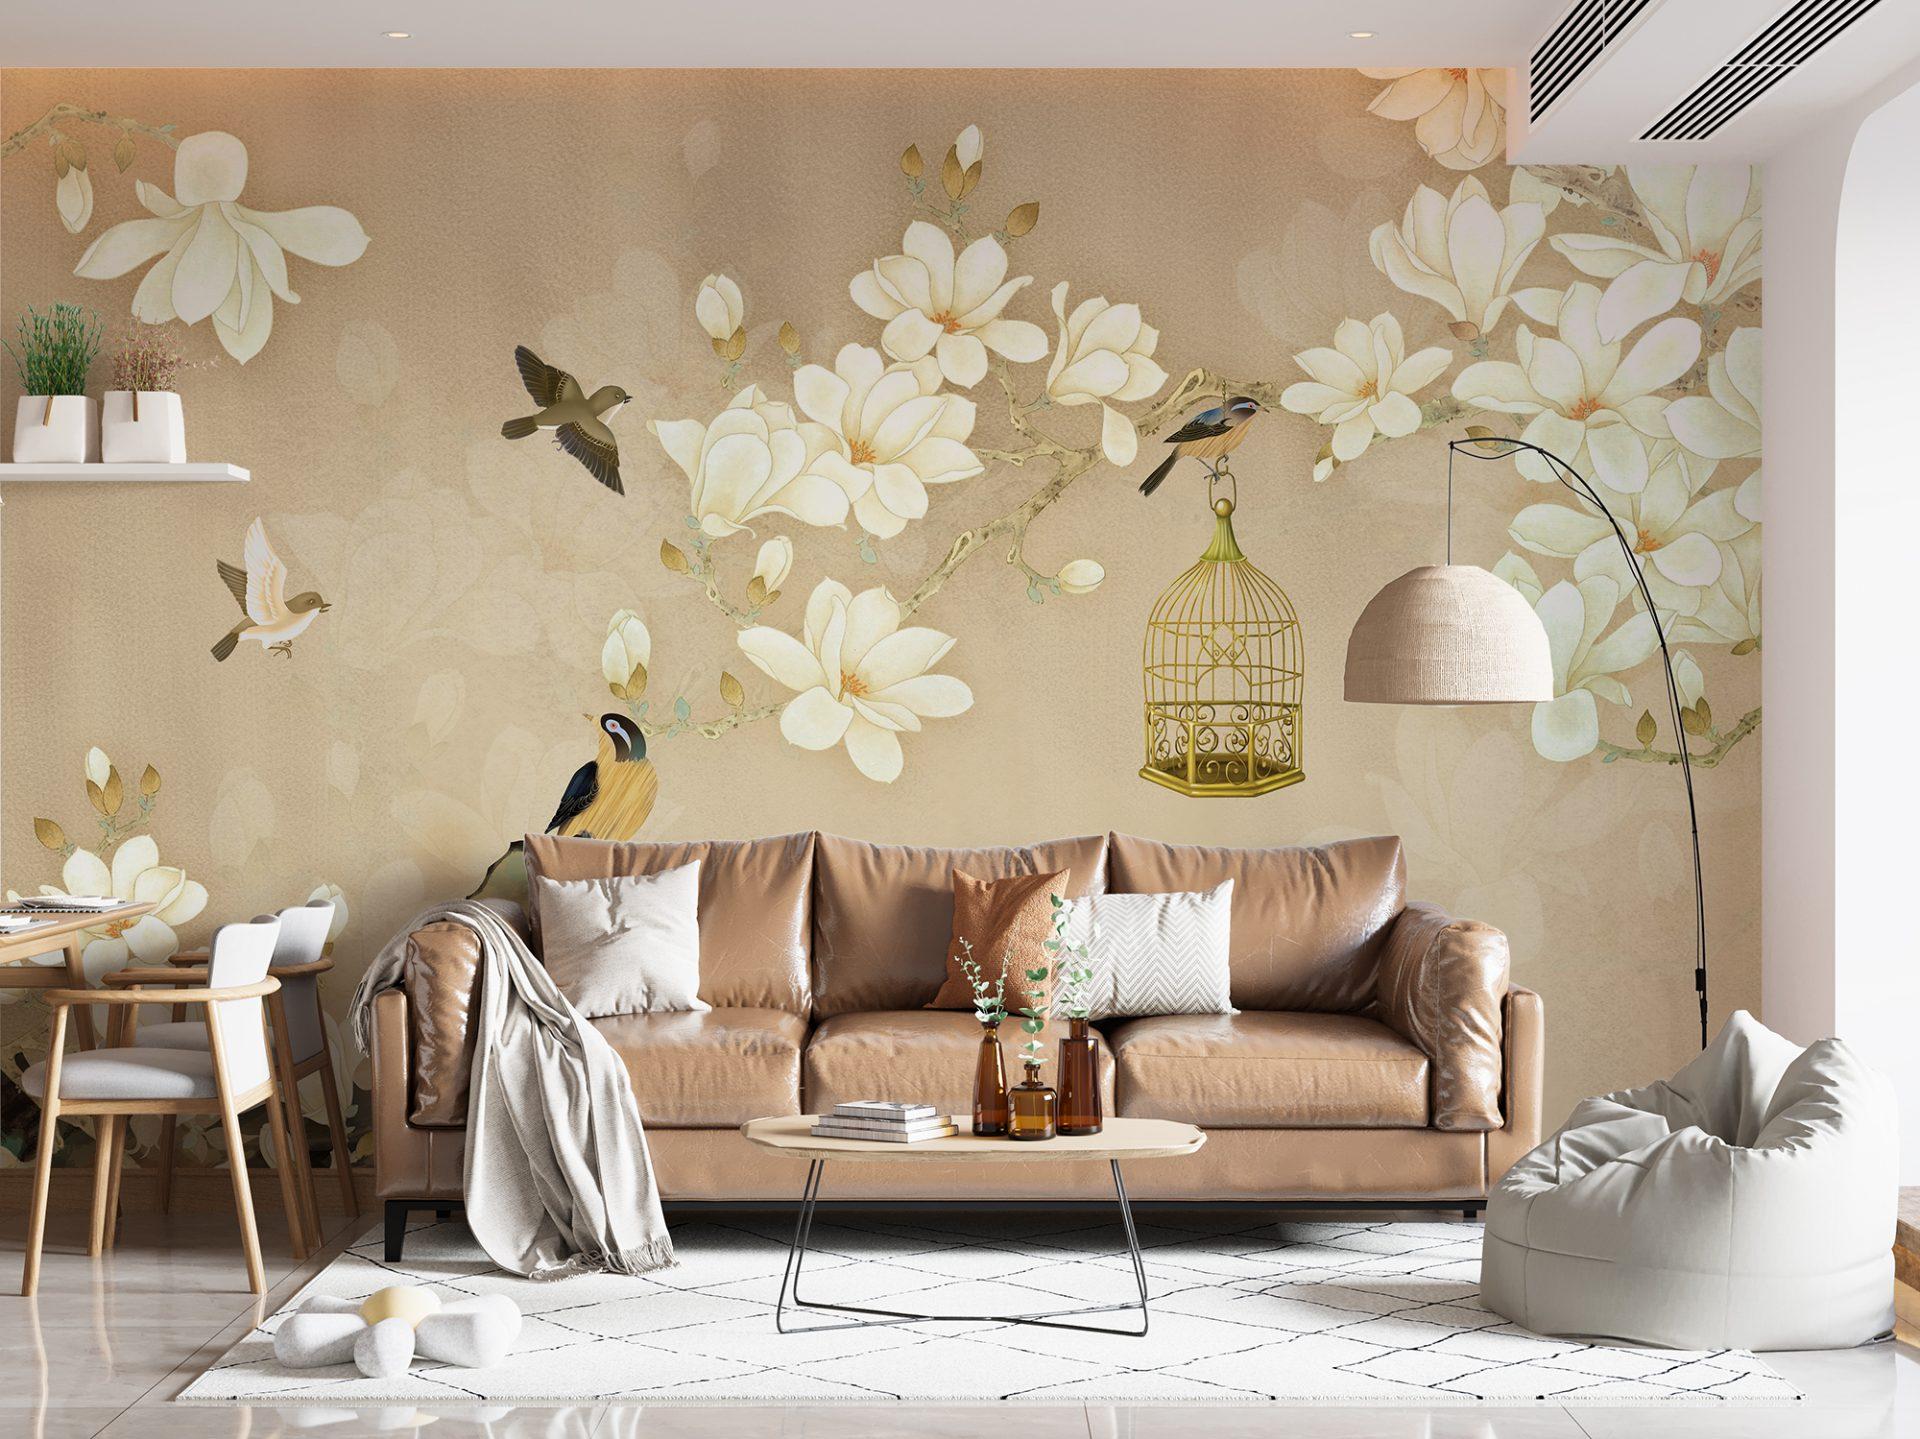 Wallpaper Trends For The Home Decor Industry Designers